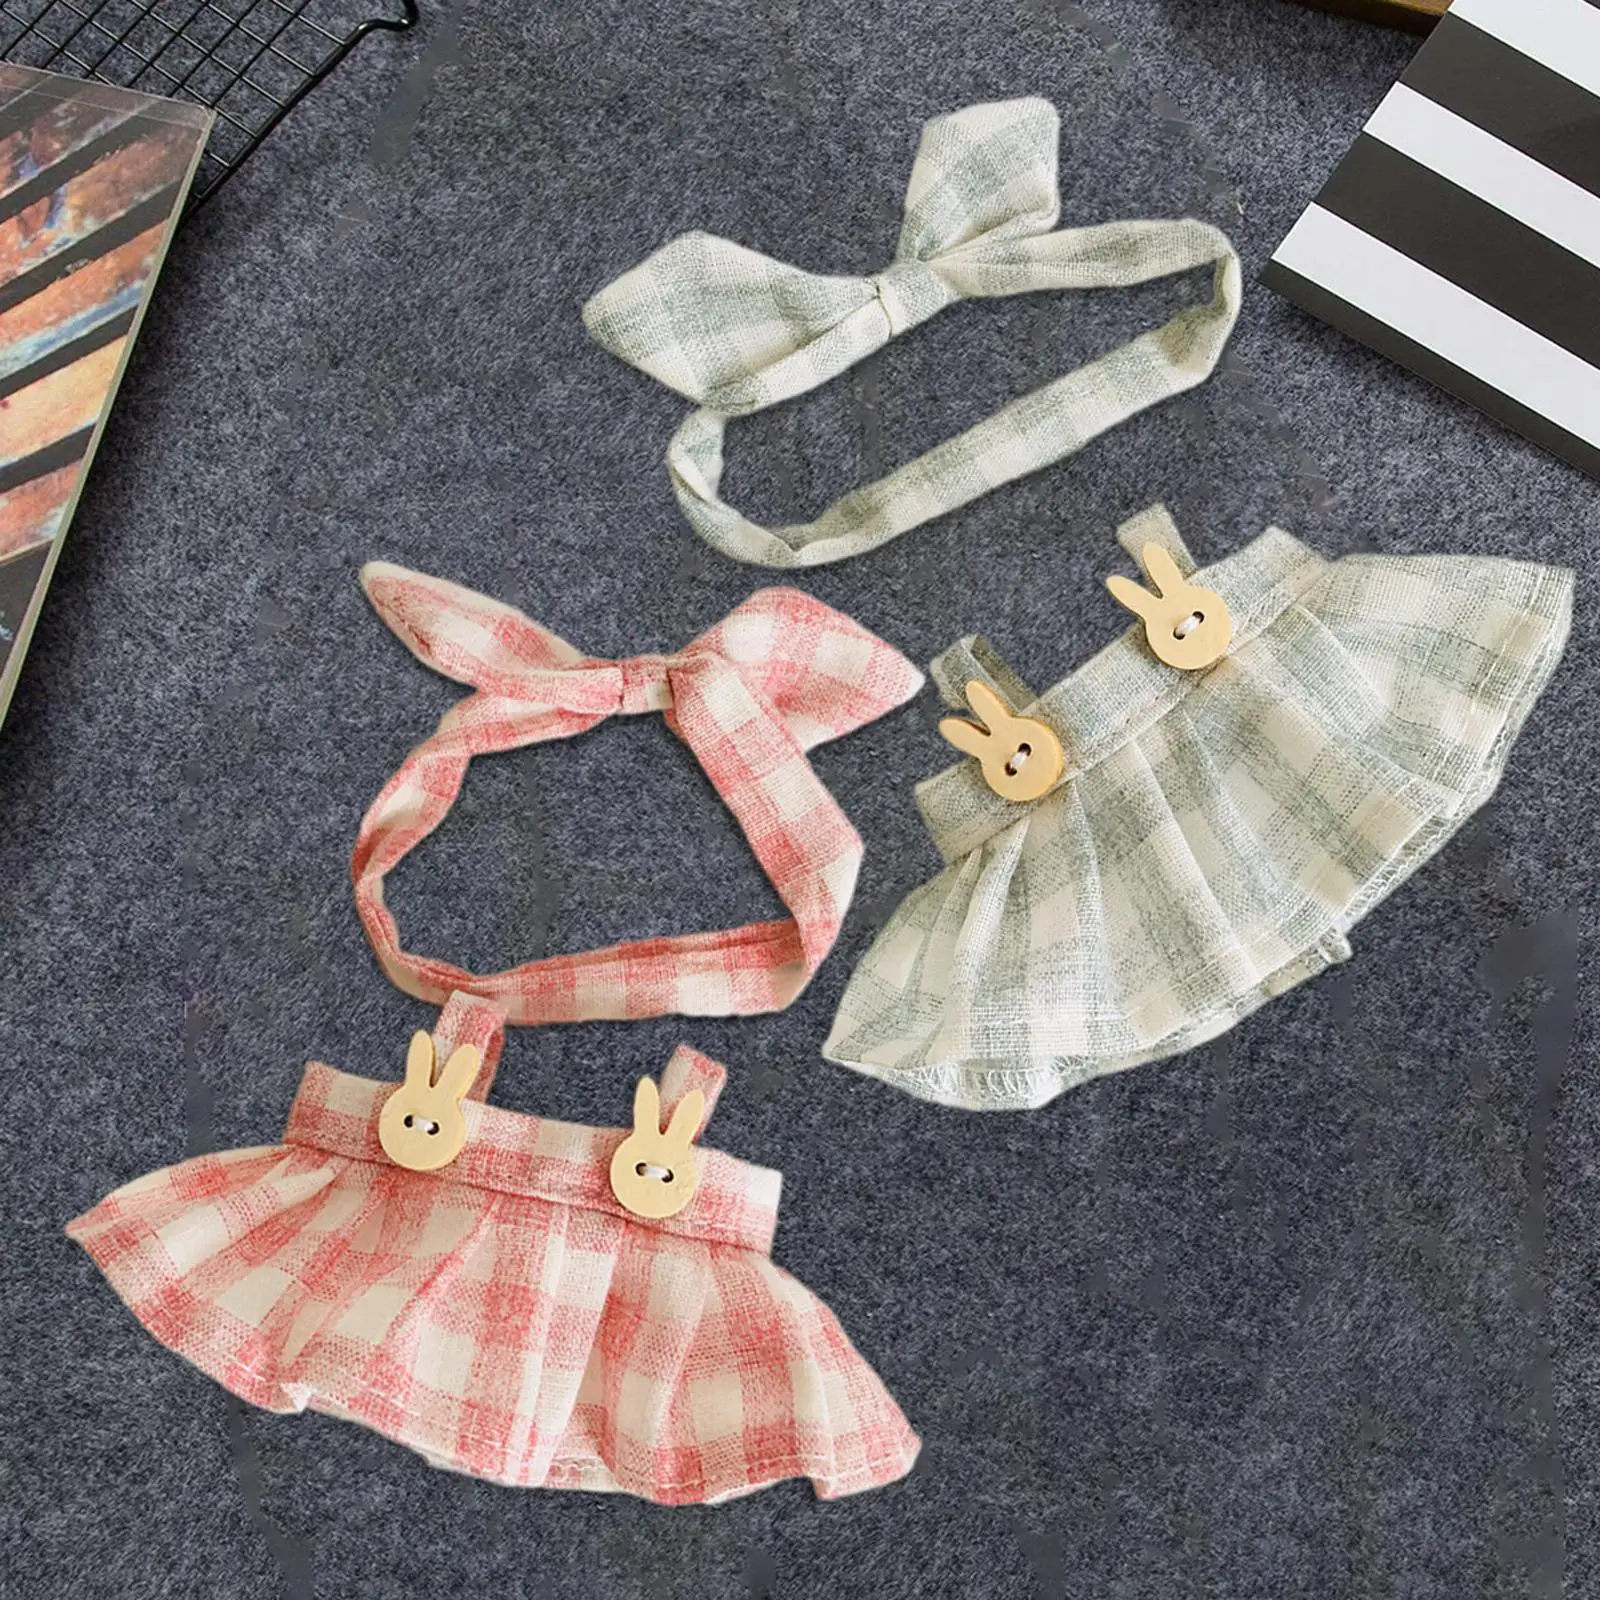 Mini Doll Clothes Doll Clothing Handmade Skirts Fashion Dress up Comfortable Doll Accessories Clothing Cute Doll Clothes Suit